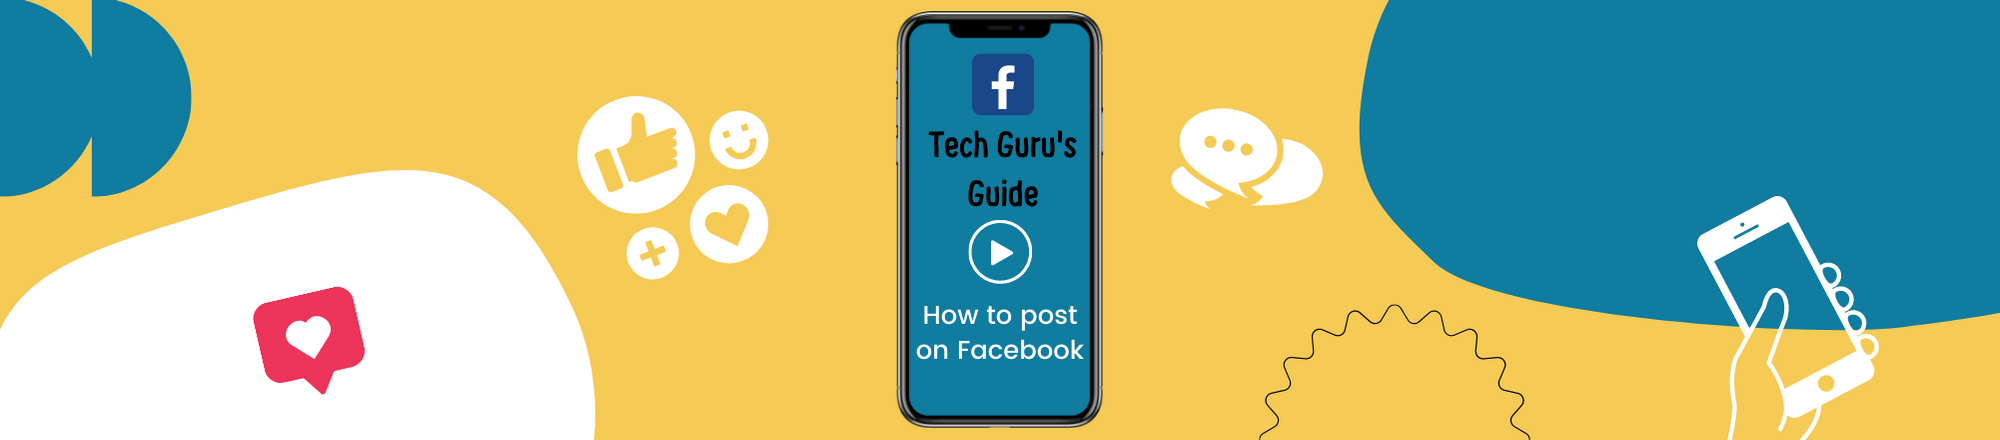 Featured image: Technology Learning Assistance for Individuals with Disabilities - How To Post on Facebook - Read full post: Technology Learning Guide for People with Disability #4